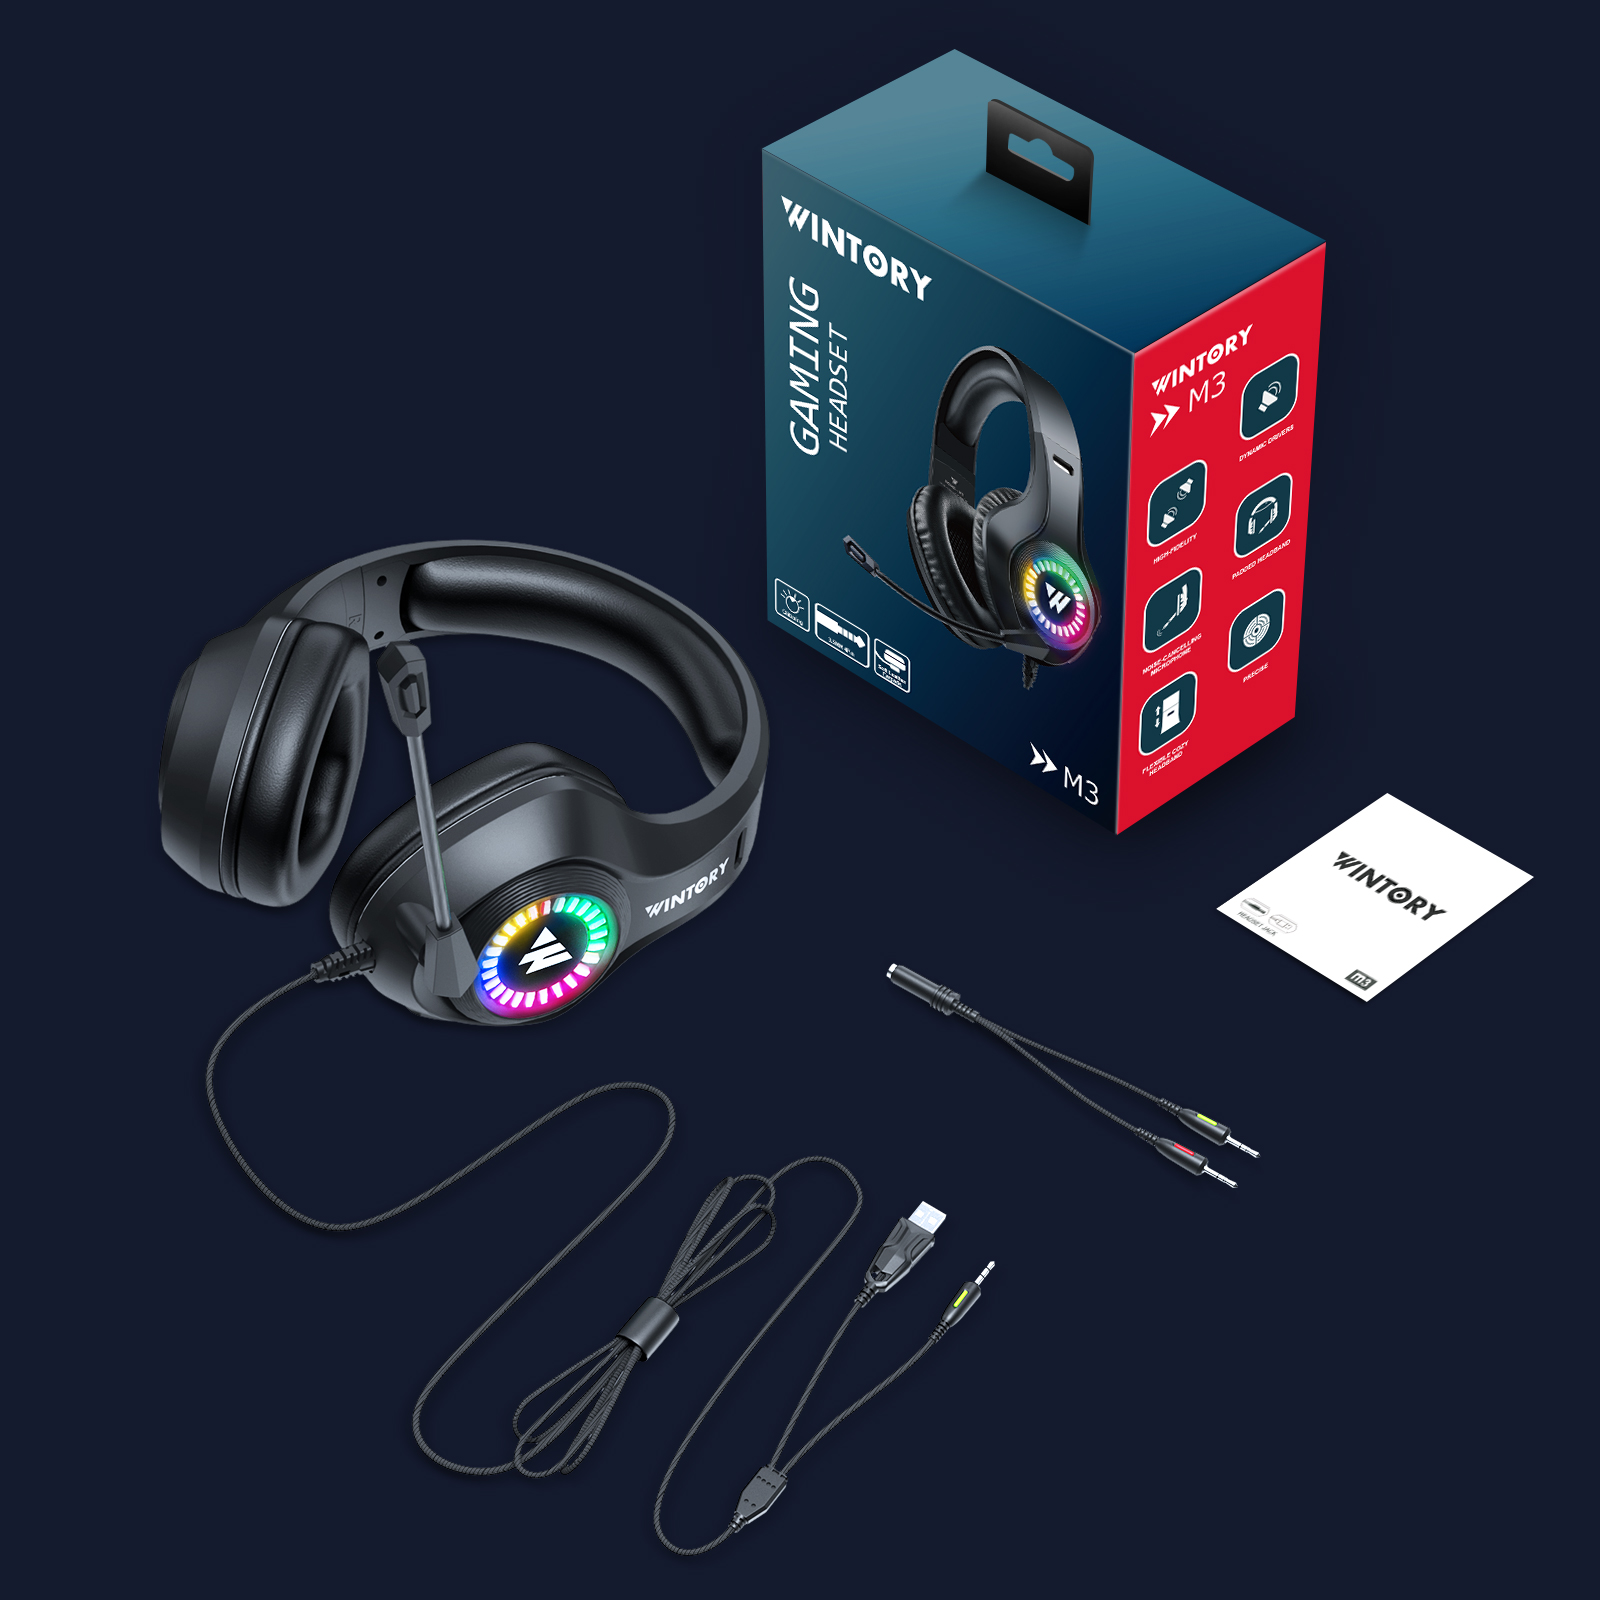 Wintory-M3-Gaming-Headset-Stereo-RGB-Light-50mm-Driver-Stereo-Adjustable-Noise-Canceling-Headphone-w-1910974-8